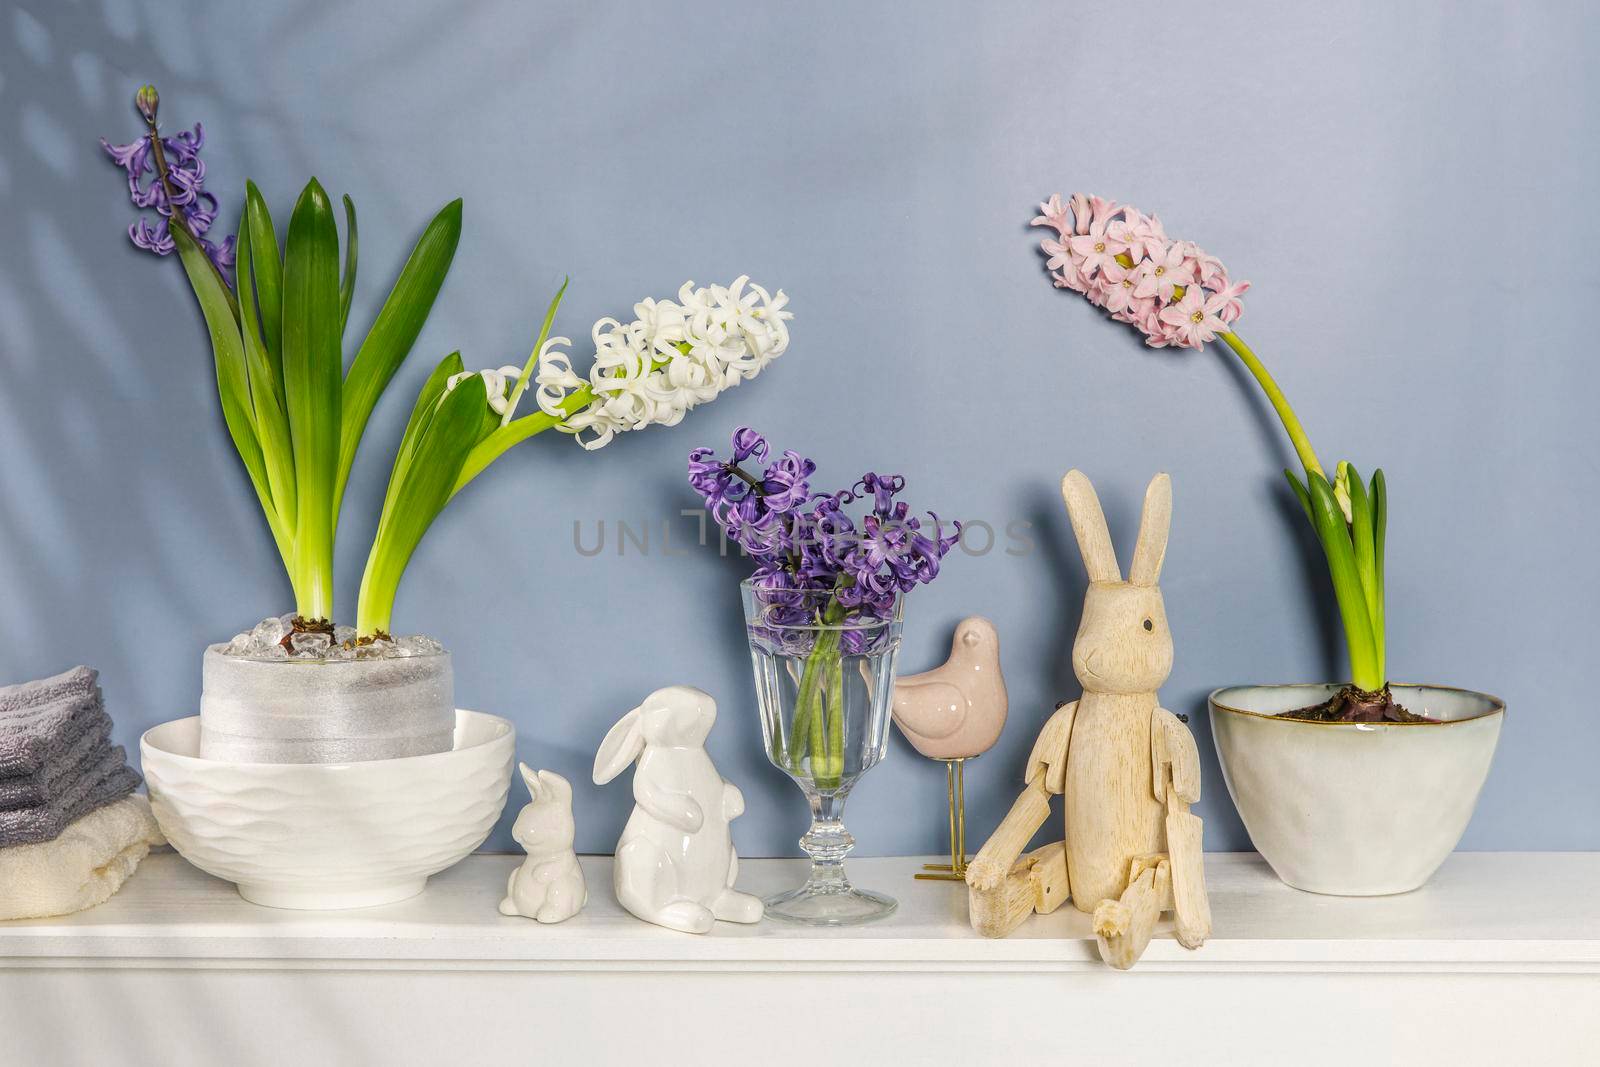 White hyacinth in a large porcelain bowl, figurines of hares and a bird, are on the fireplace against the dark blue wall. Layout. Spring concept